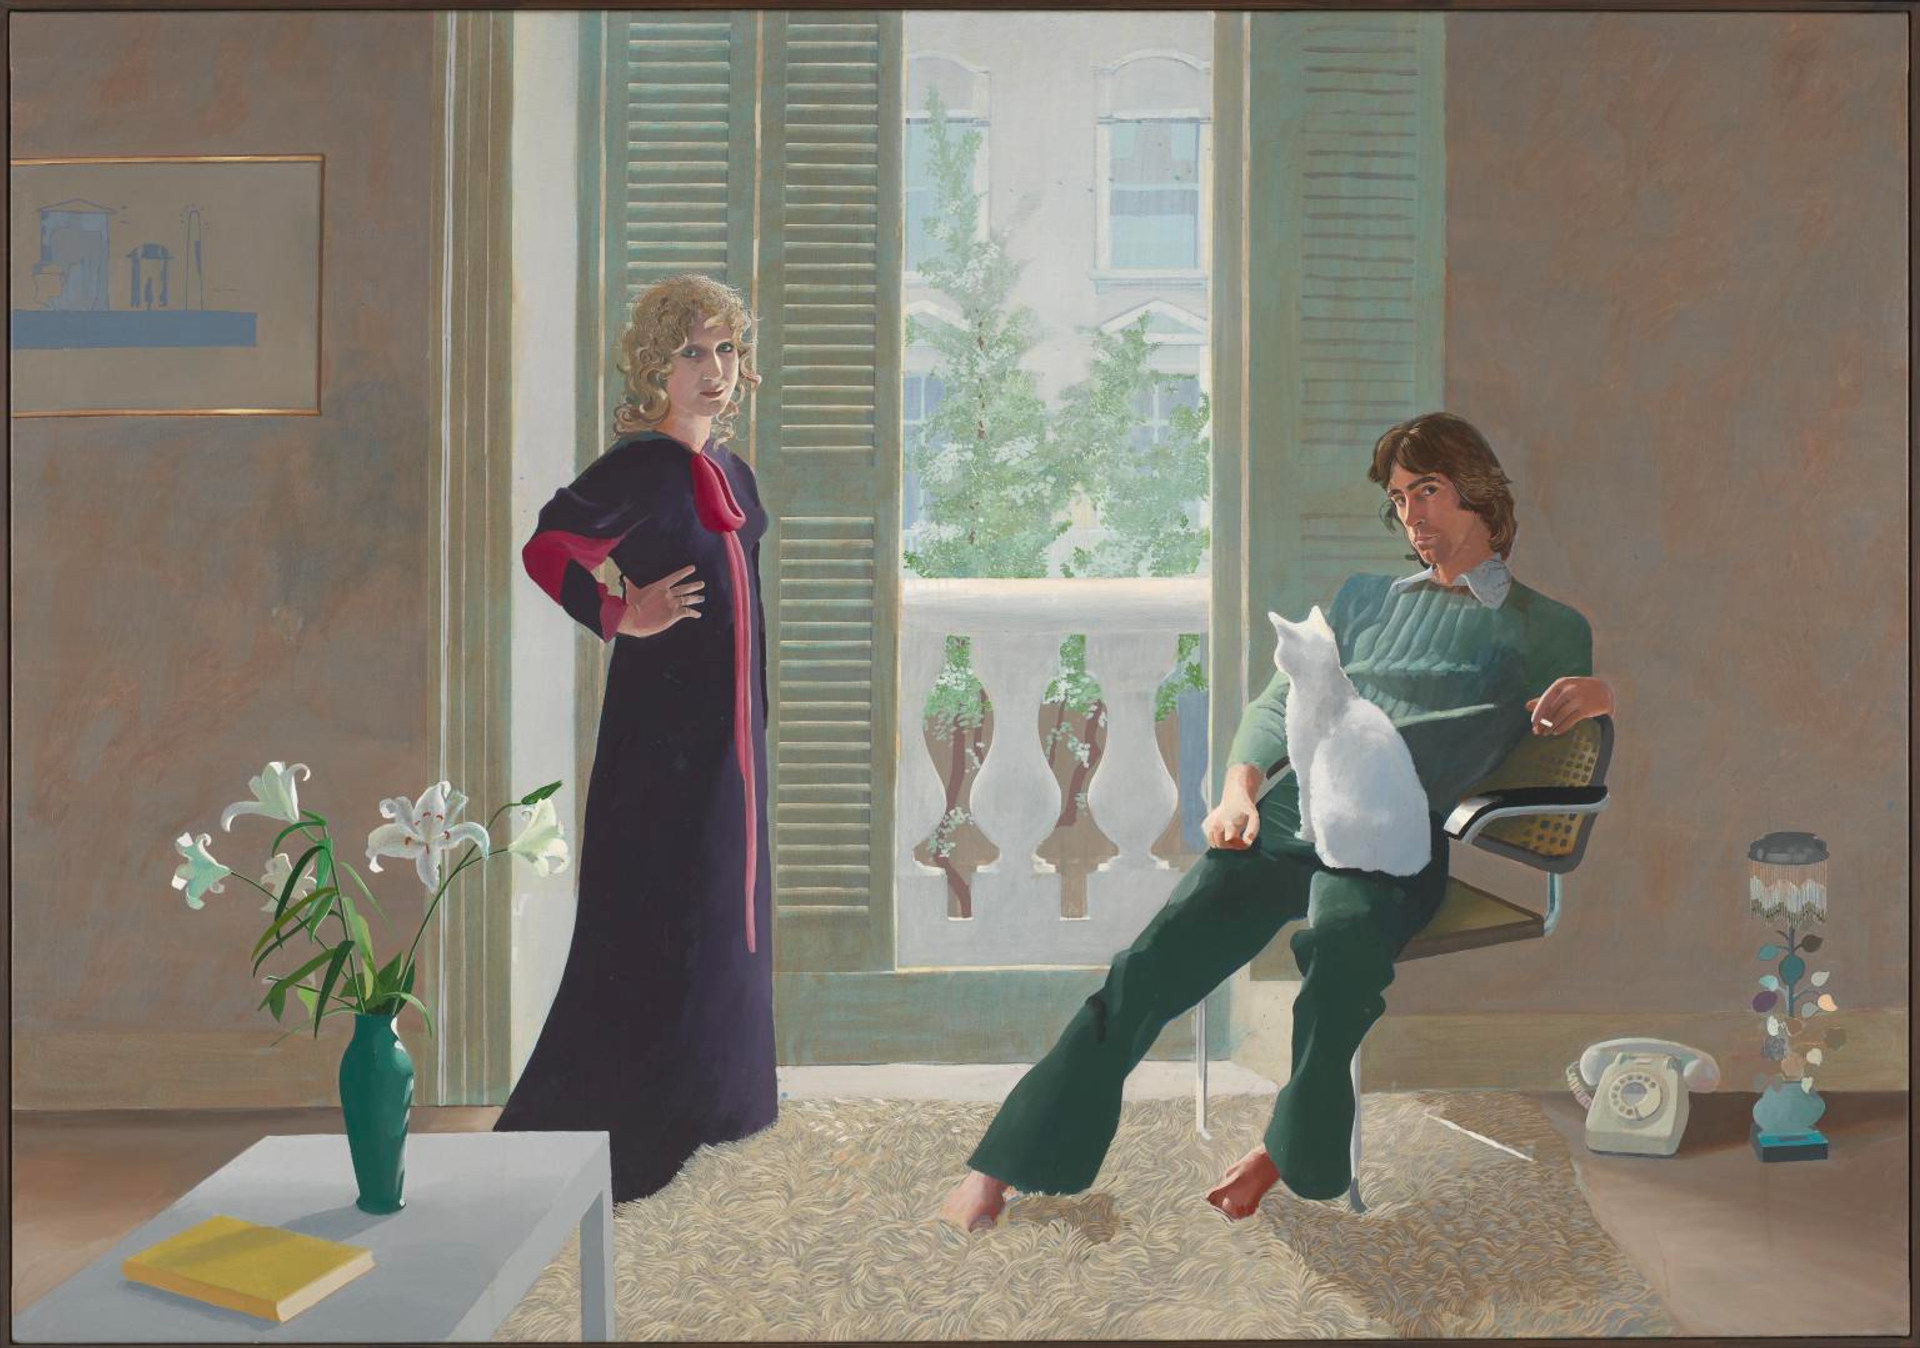 A couple pose in their London apartment. A man in green sits in a chair with a cat on his lap; a woman stands next to him with her hands on her hips. Both stare directly at the viewer.